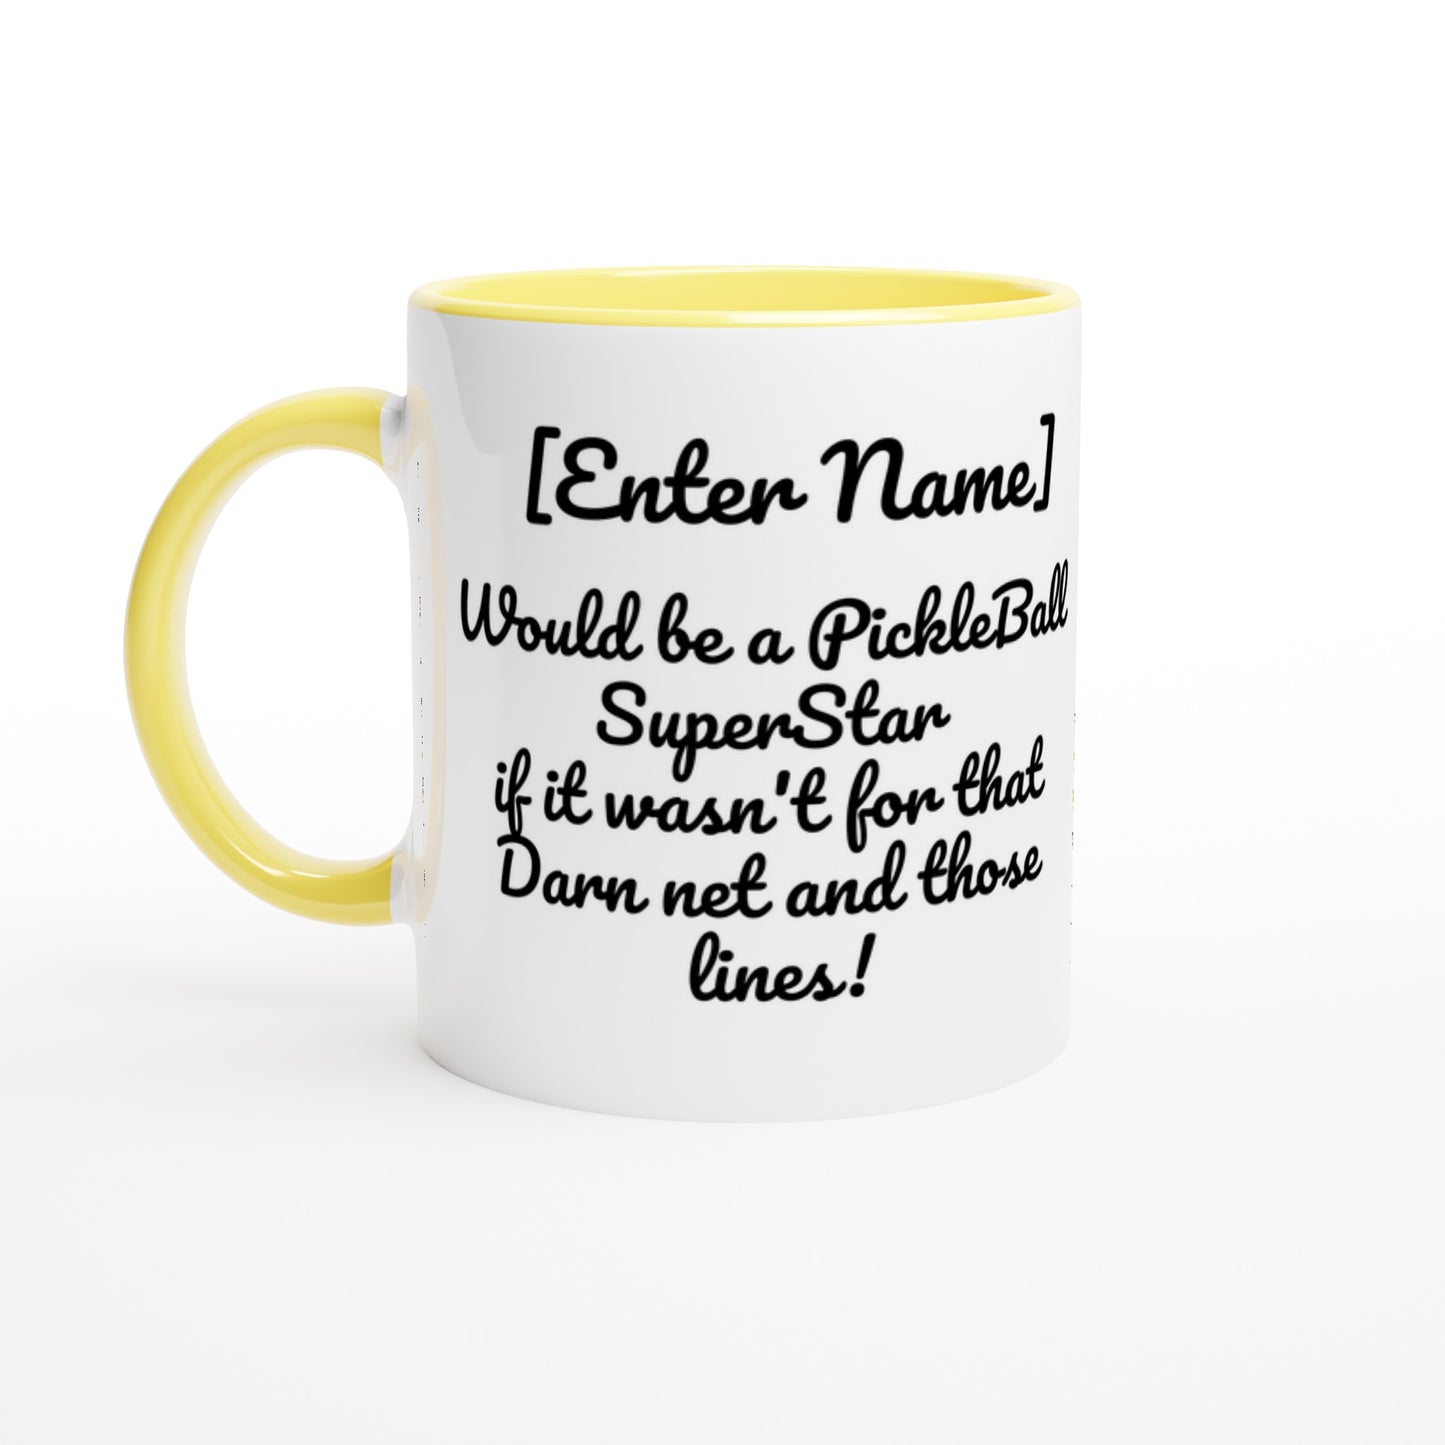 Personalized White ceramic 11oz mug with Yellow handle Personalized with motto Your Name Would be a PickleBall Superstar if it wasn’t for that Darn net and those lines front side Let's Play PickleBall logo on back dishwasher and microwave safe ceramic coffee mug from WhatYa Say Apparel front view.